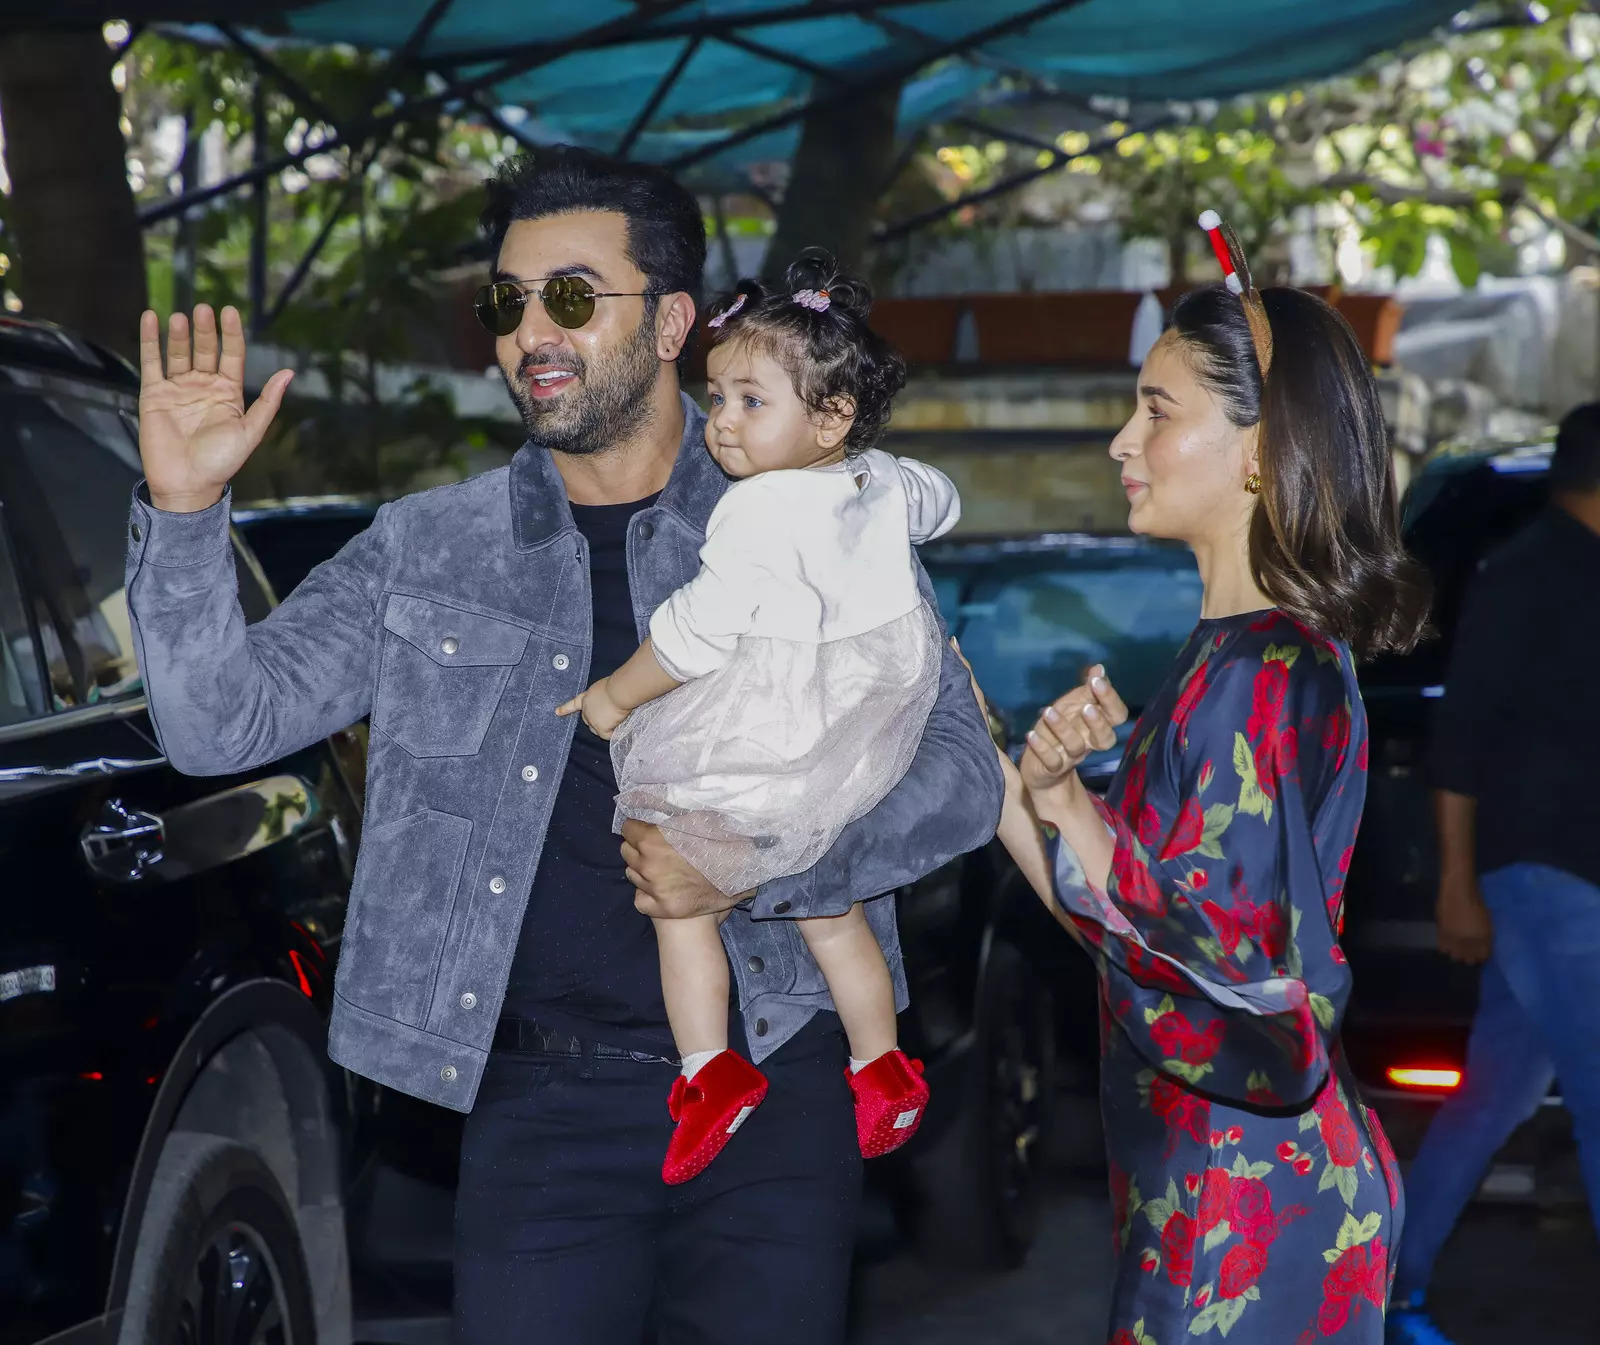 Alia Bhatt, Ranbir Kapoor reveal daughter Raha's face for the first time.  See adorable pics here - The Economic Times